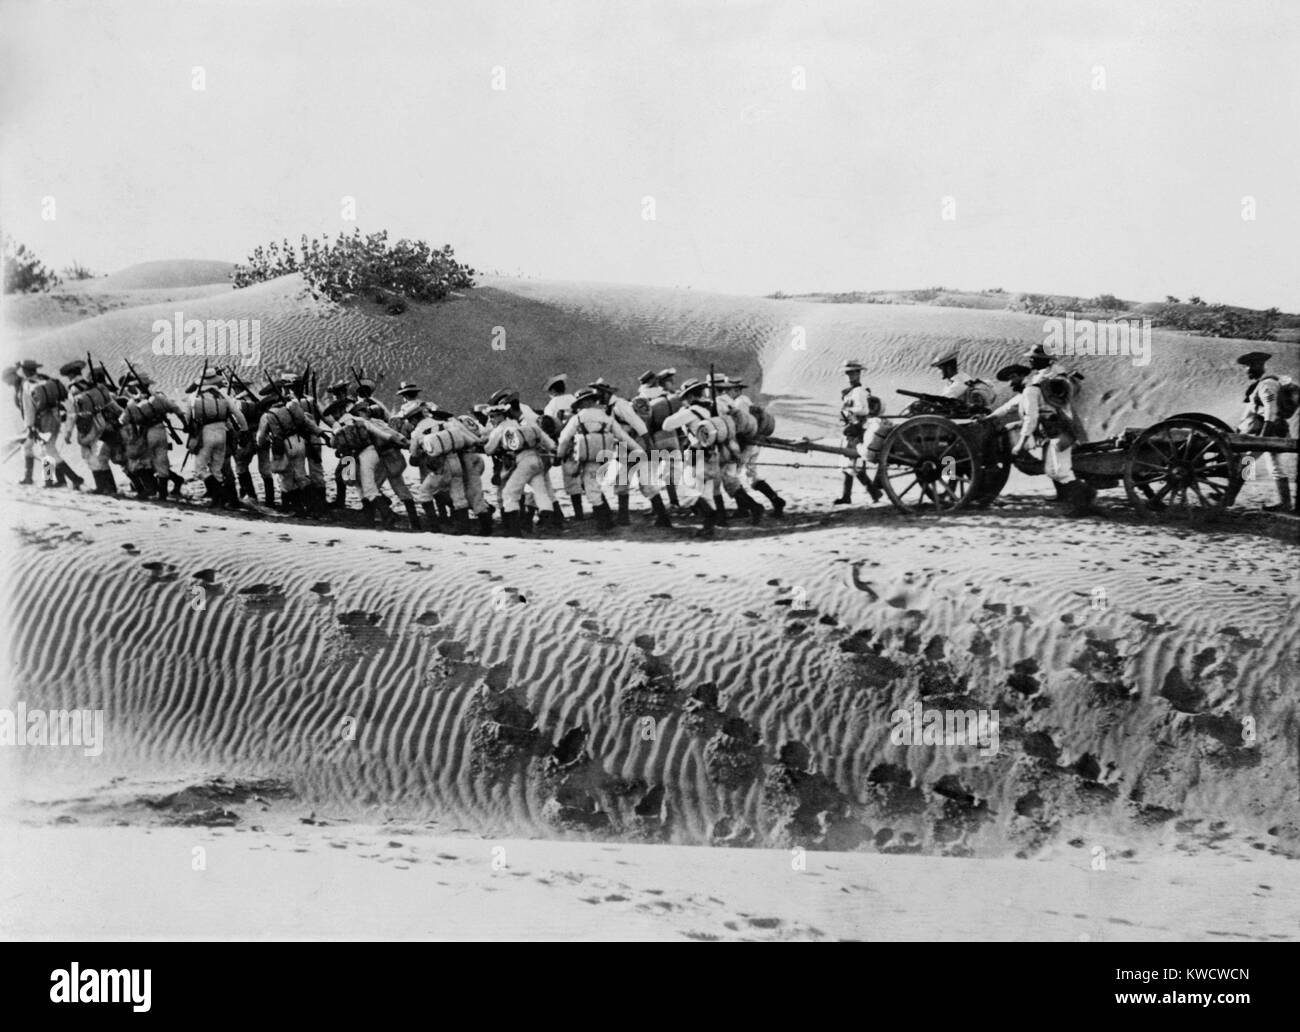 World War 1 in the Middle East. British naval landing party pulling field gun and caisson across the Mesopotamian desert. In the early months of the war British troops captured Basra, the chief city of the region, now southern Iraq. Ca. 1914. (BSLOC 2013 1 76) Stock Photo